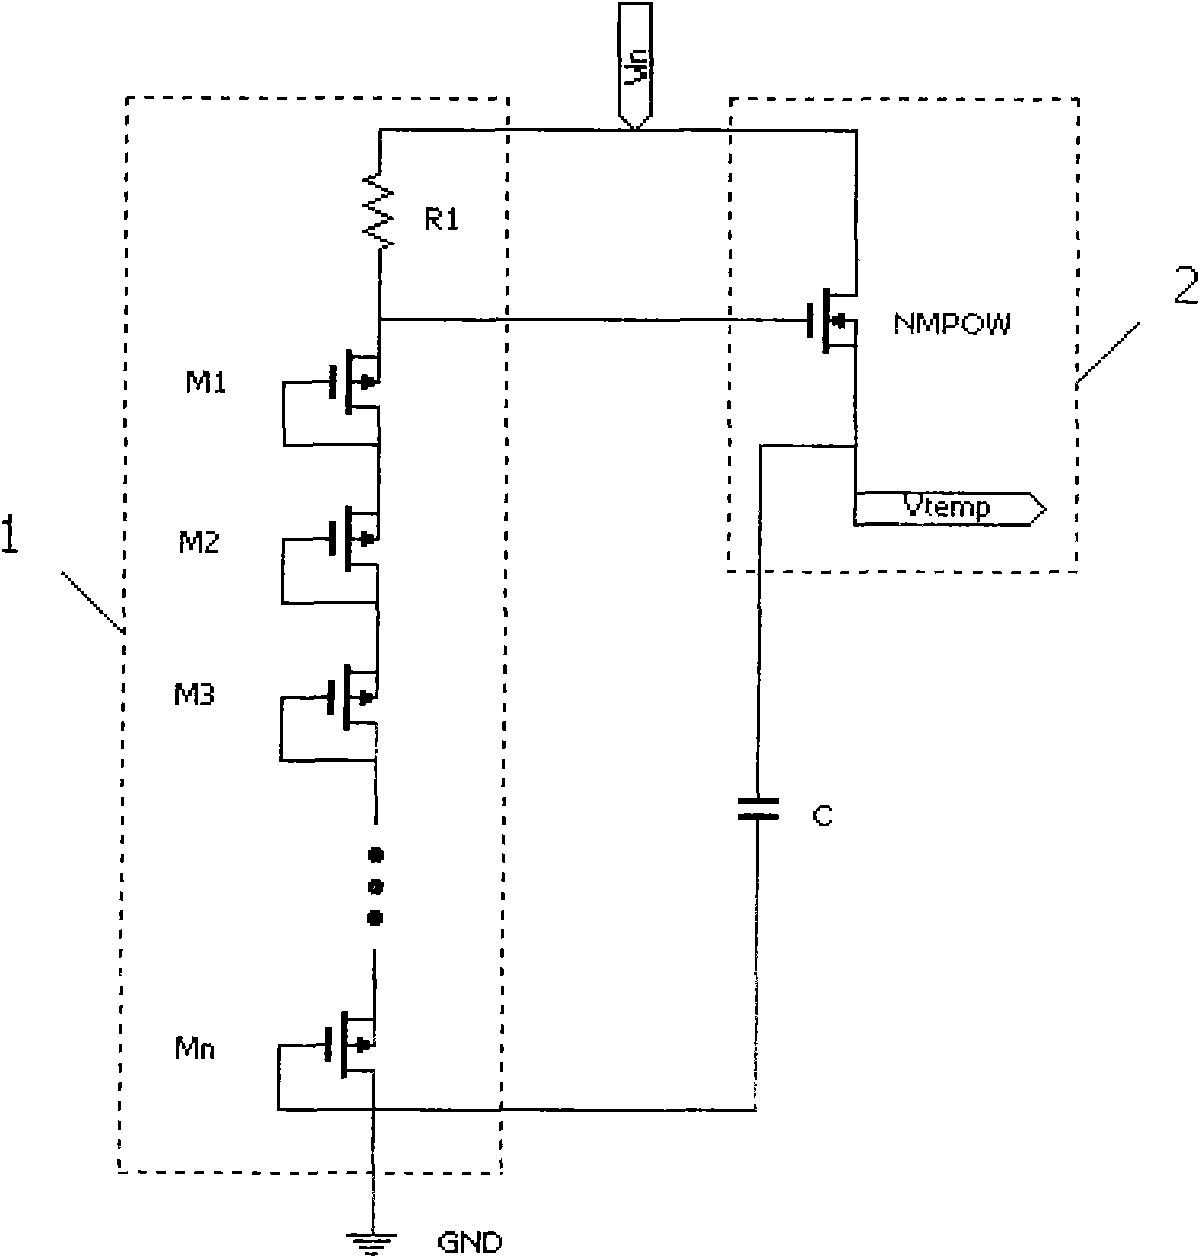 High-voltage pre-regulation voltage reduction circuit for use in wide input range